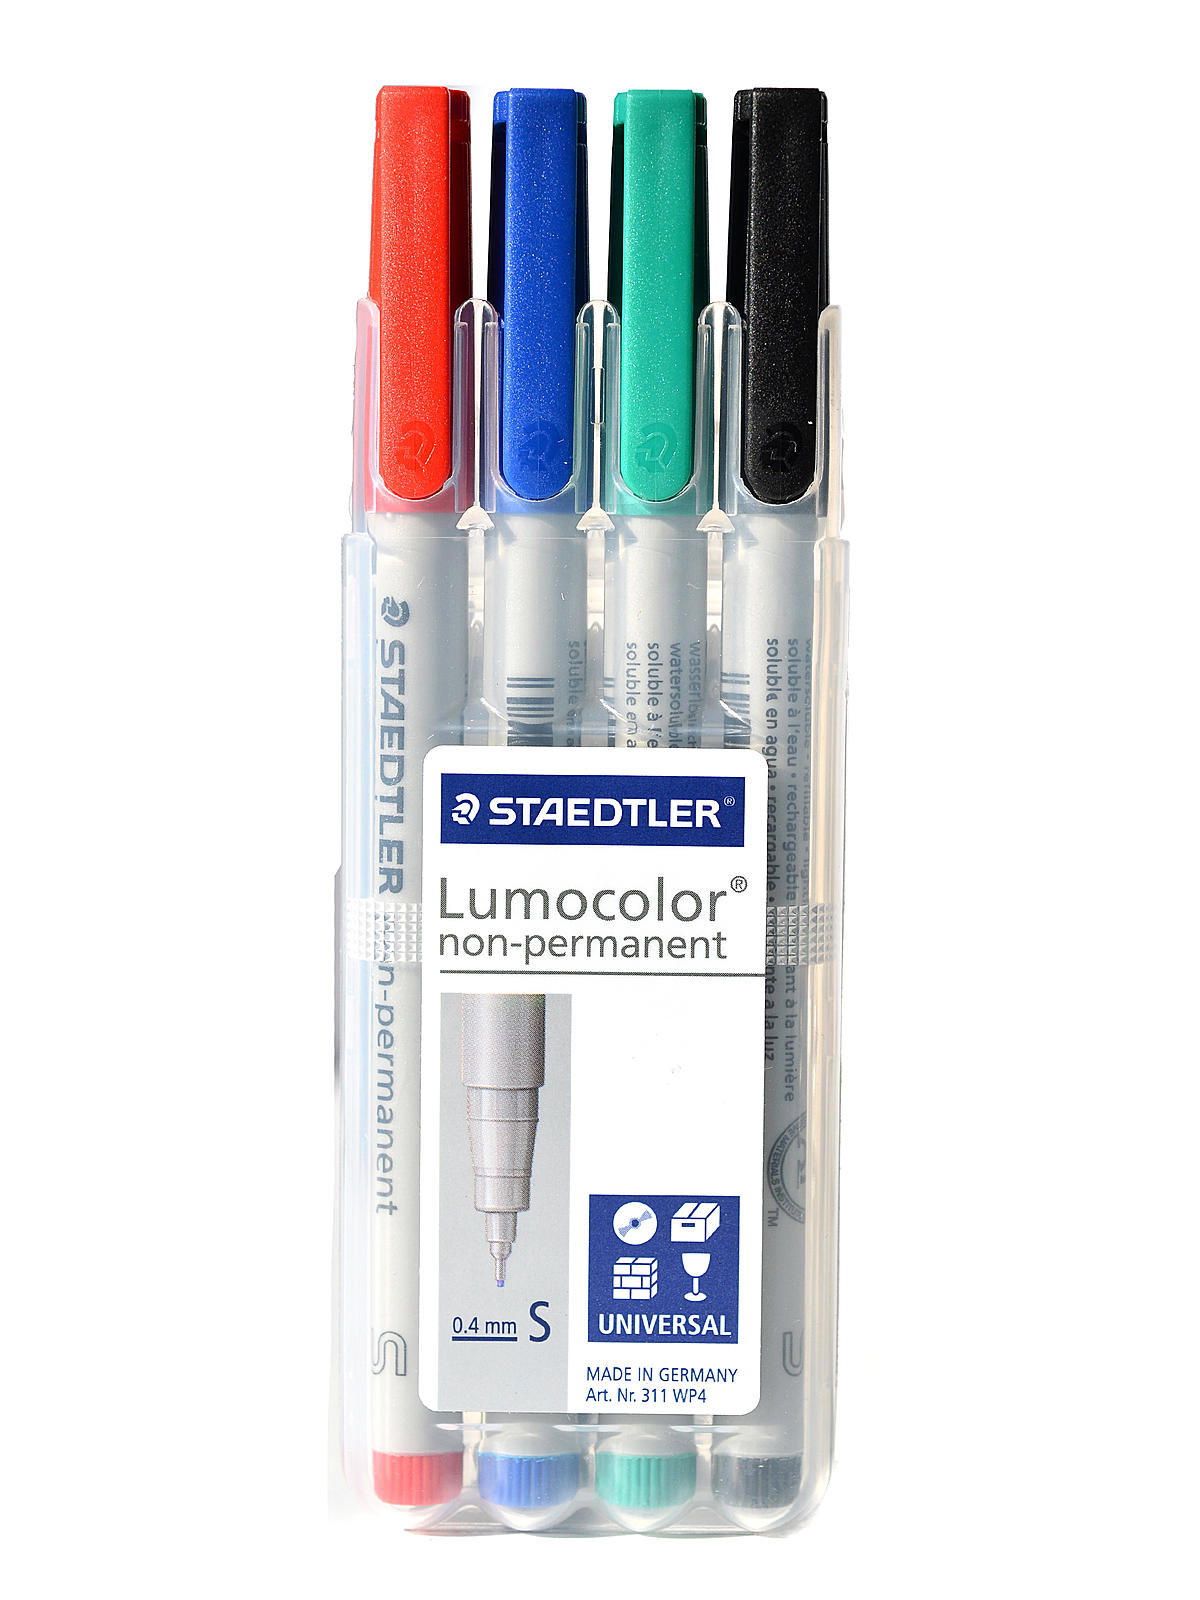 Staedtler Lumocolor Non-permanent Overhead Projection Markers